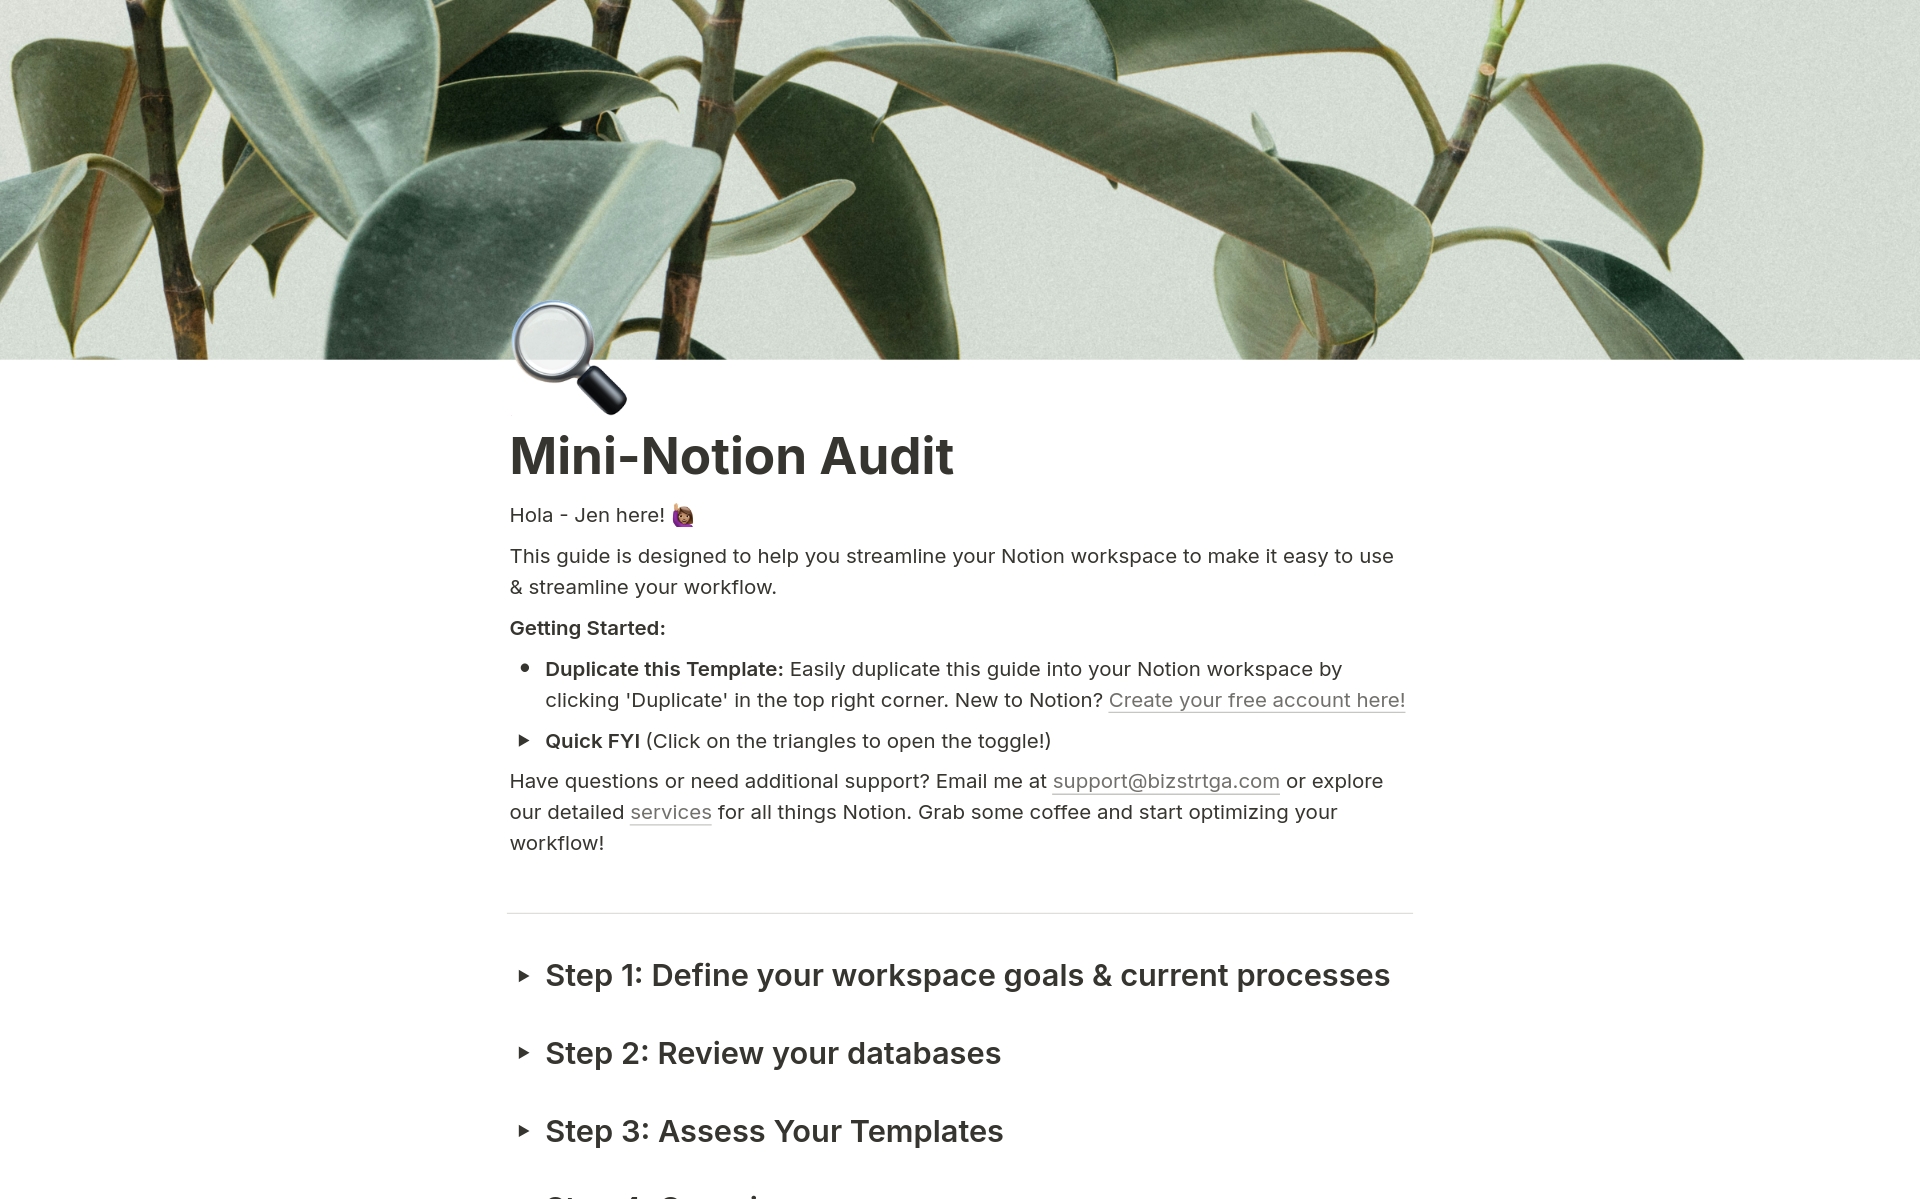 This Mini-Notion Audit guide is designed to help you streamline your Notion workspace to make it easy to use & streamline your workflow.